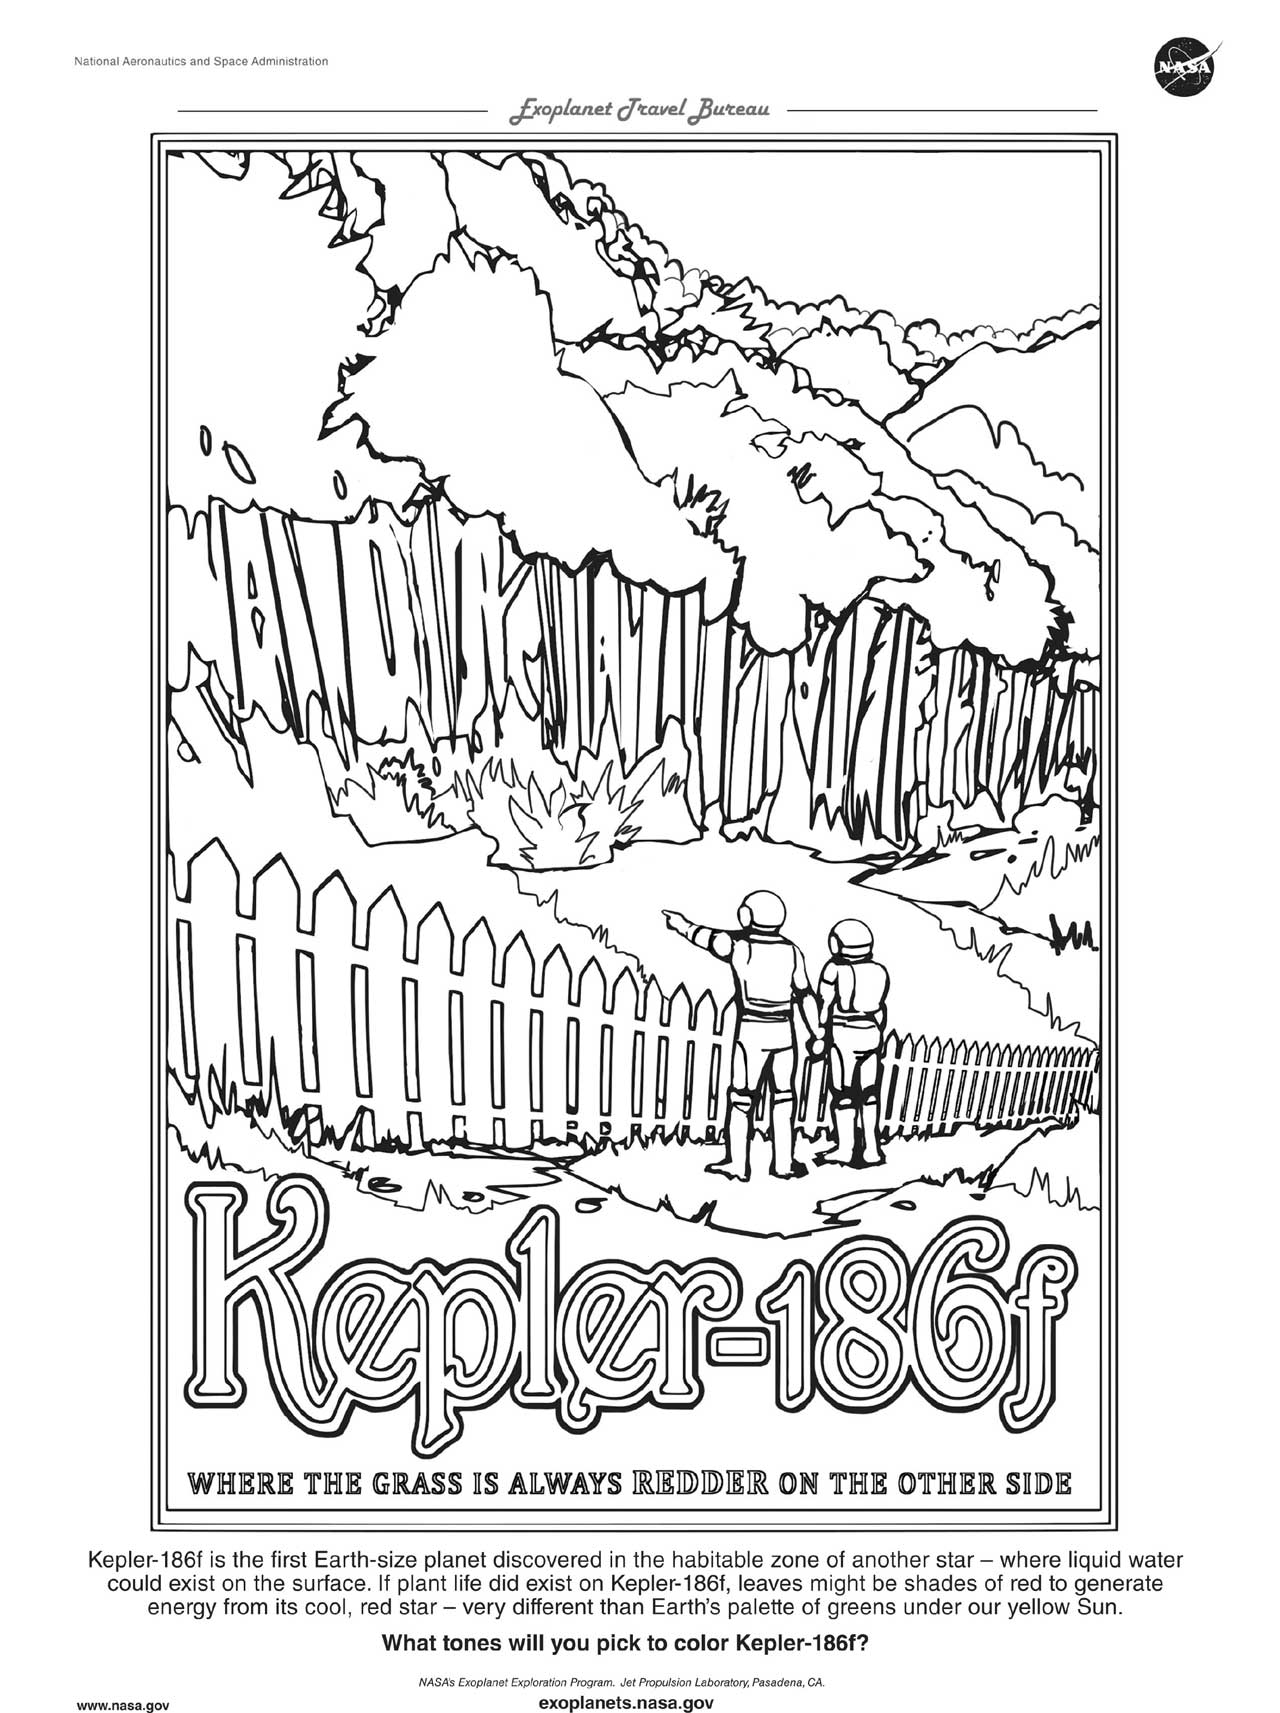 A downloadable version of a coloring page for the Kepler-16b exoplanet travel poster. 